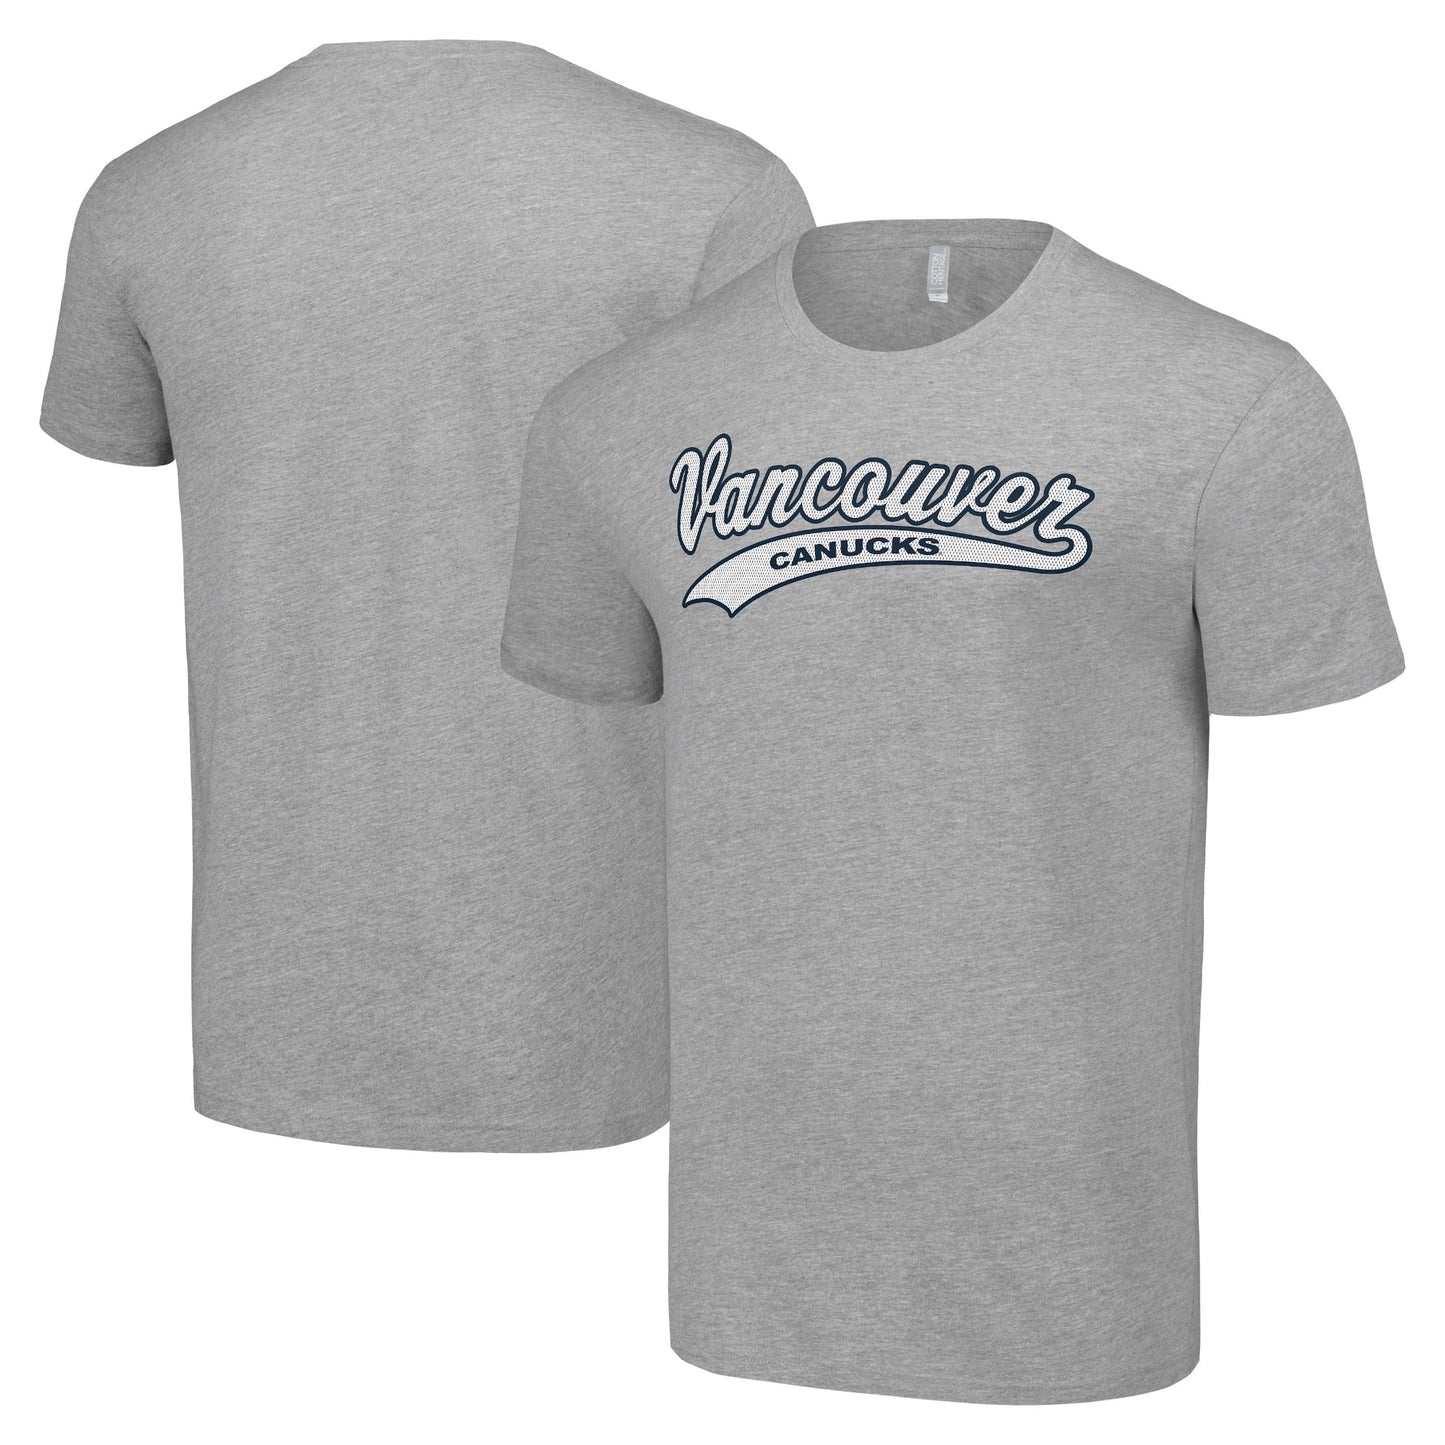 Men's Starter Heather Gray Vancouver Canucks Tailsweep T-Shirt